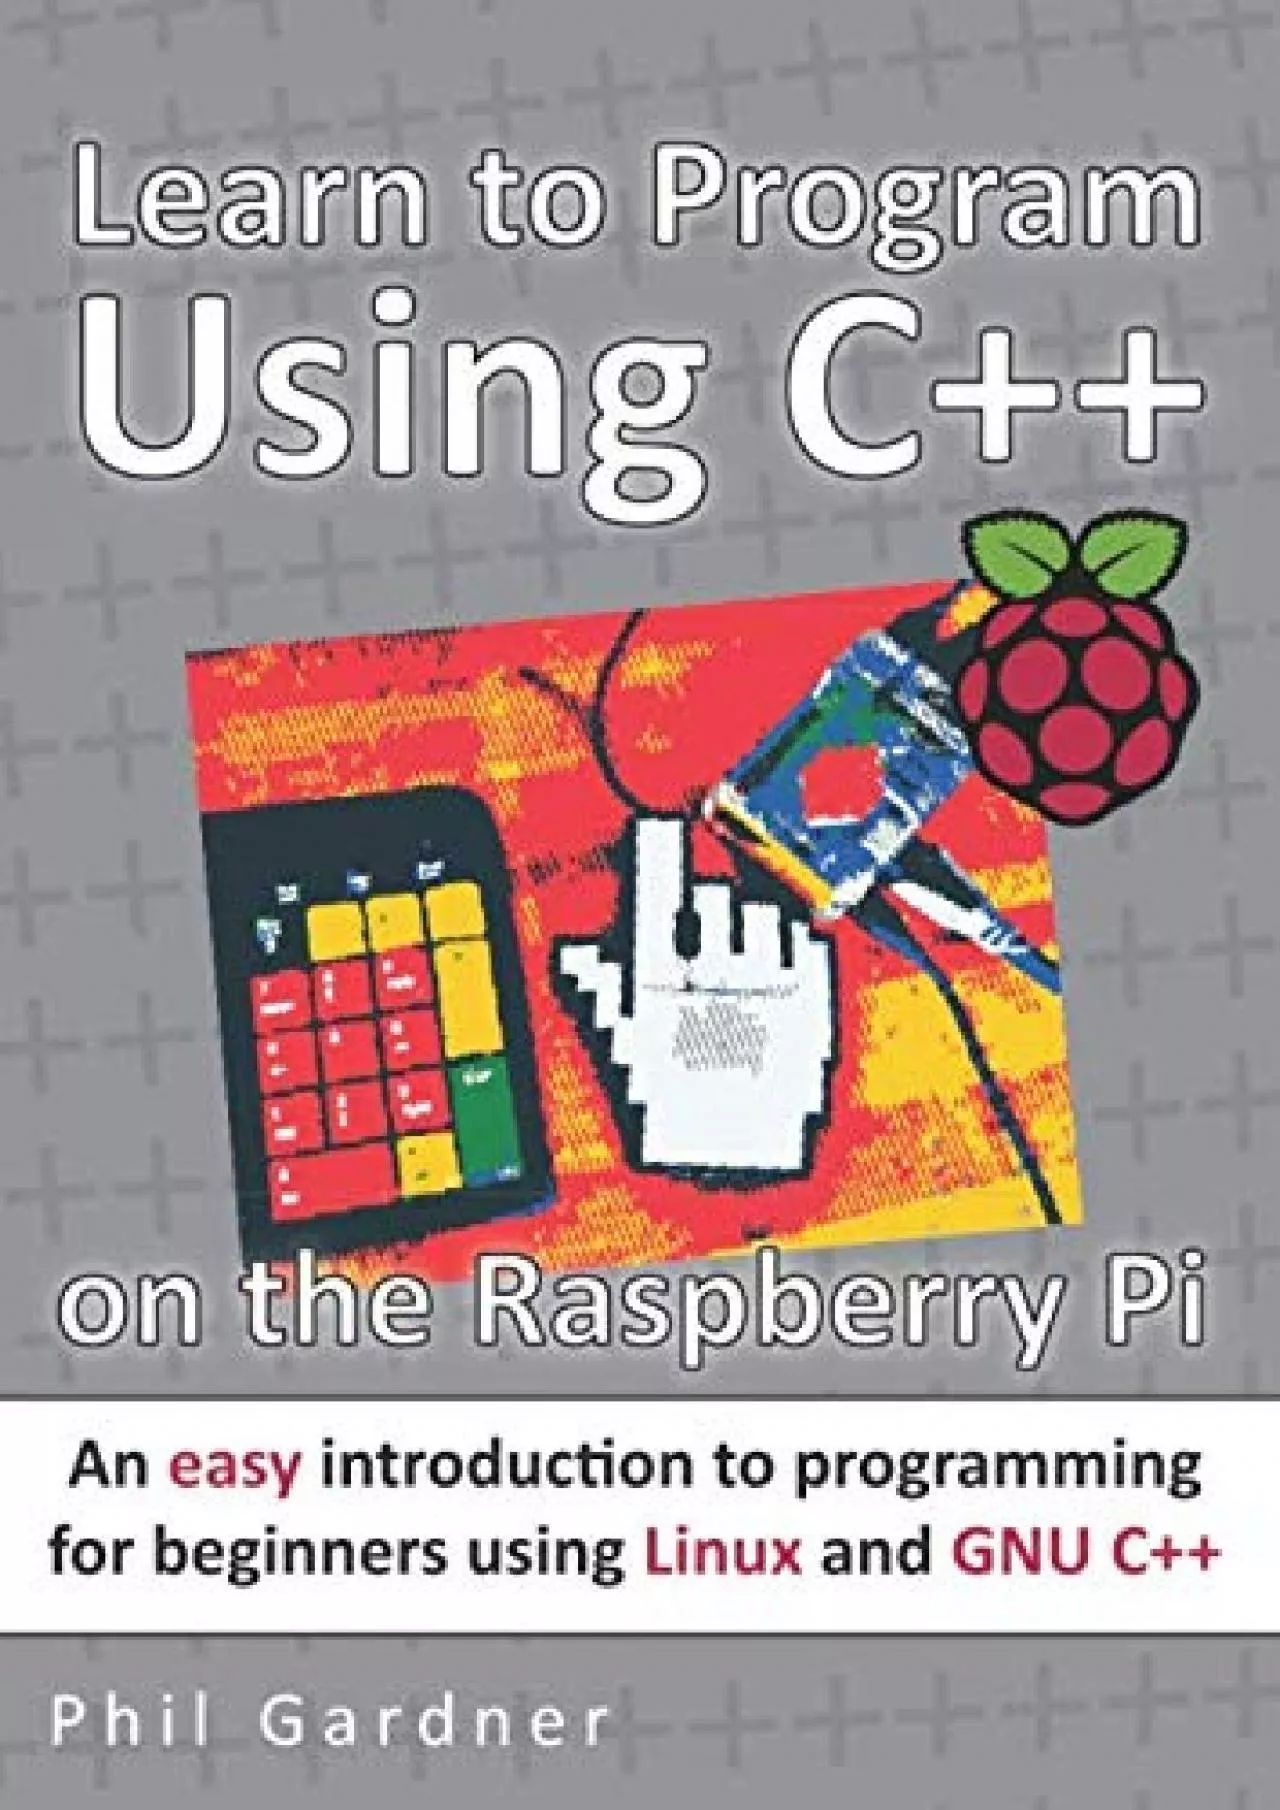 [FREE]-Learn to Program Using C++ on the Raspberry Pi: An easy introduction to programming